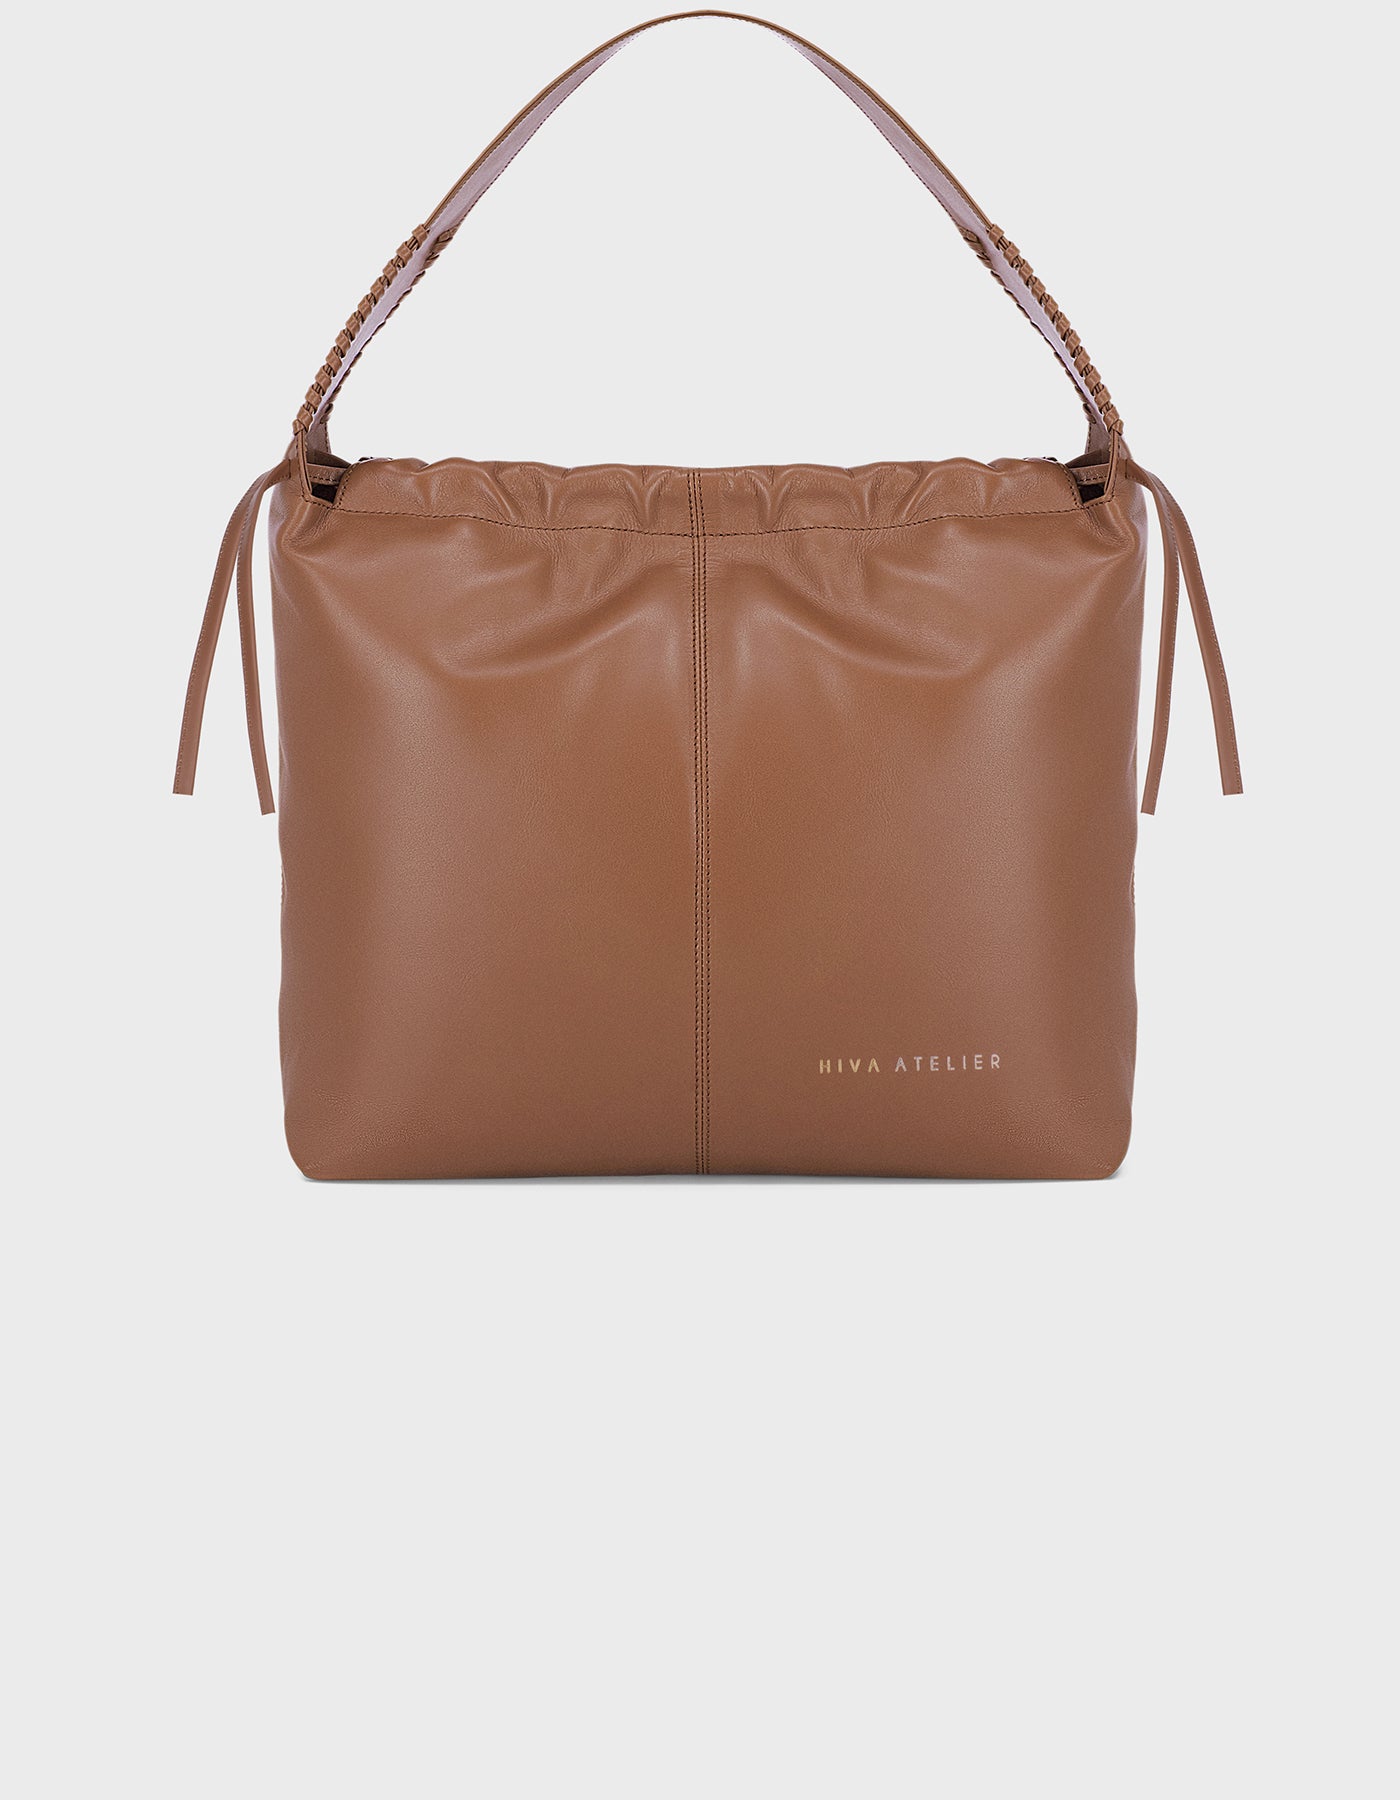 Hiva Atelier - All Day Shopping Bag Smooth Wood